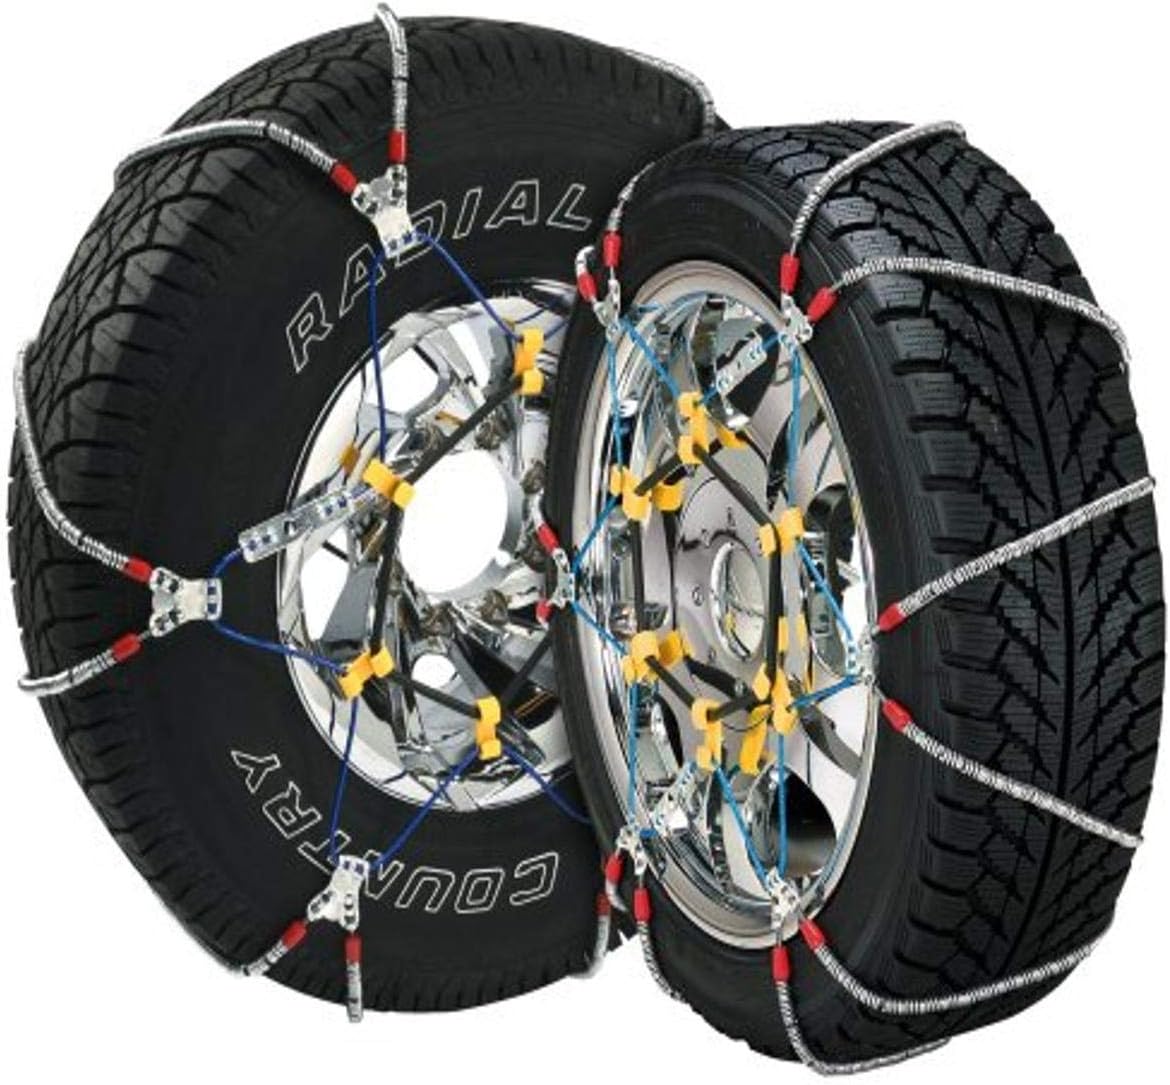 Security Chain Company SZ143 Super Z6 Cable Tire Chain [...]